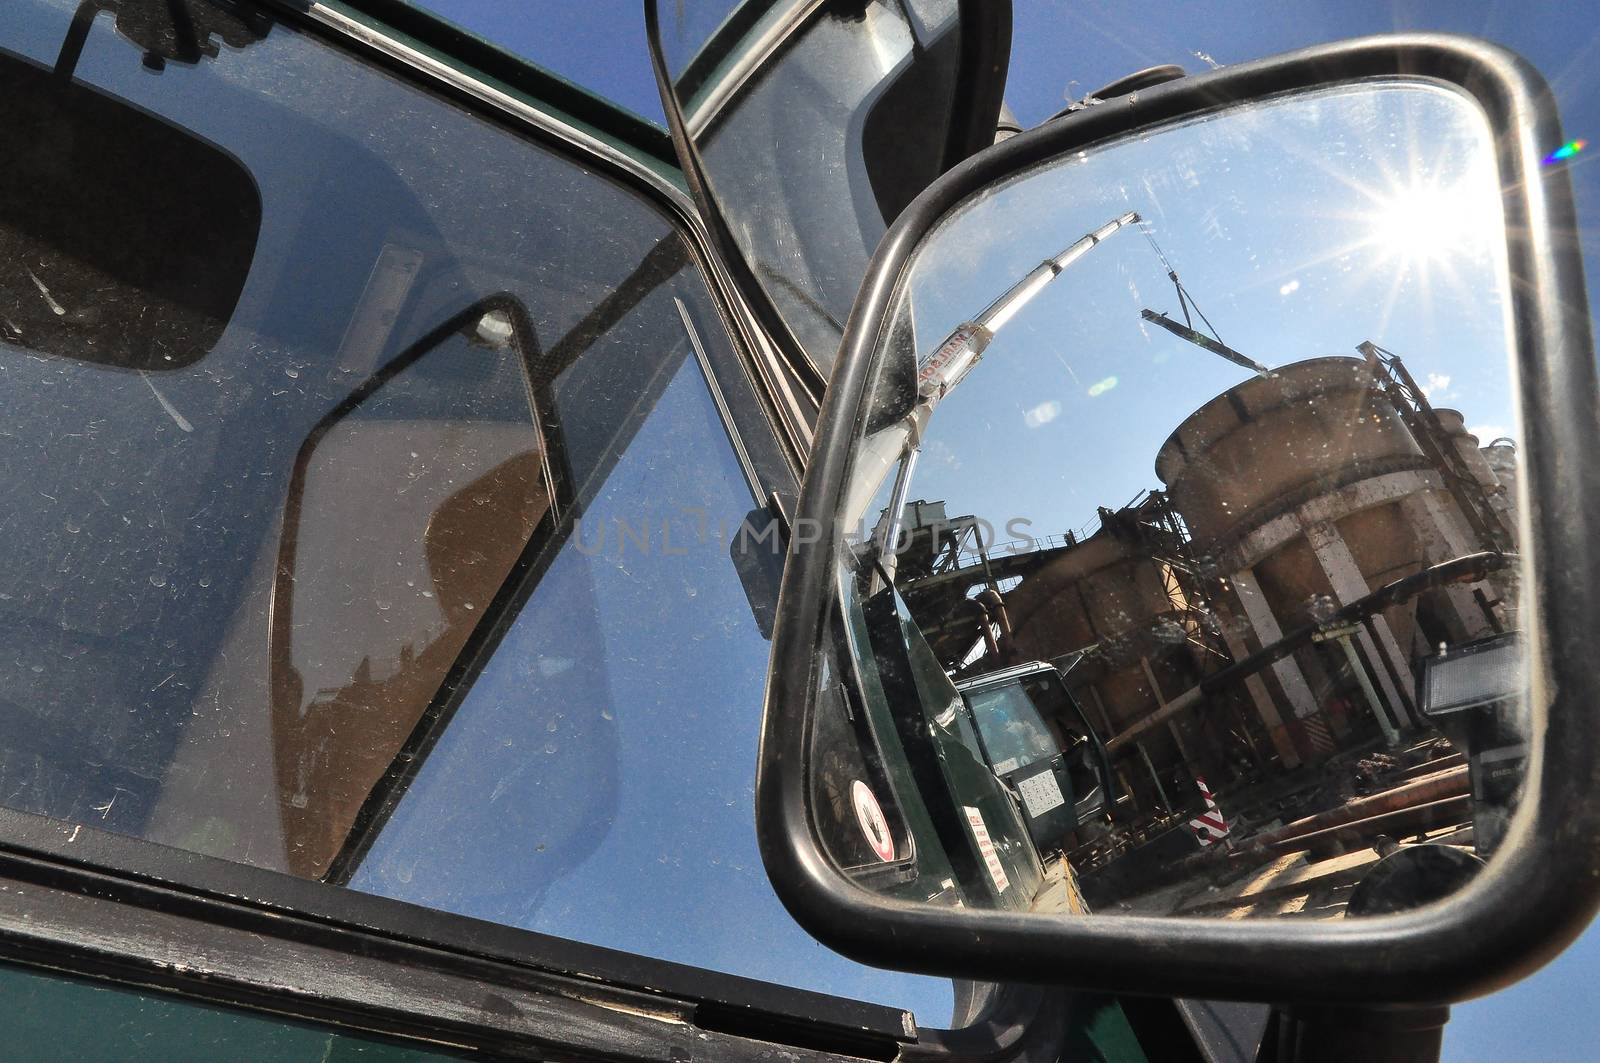 The actions of the truck-mounted crane can be seen reflected in its large exterior mirror.